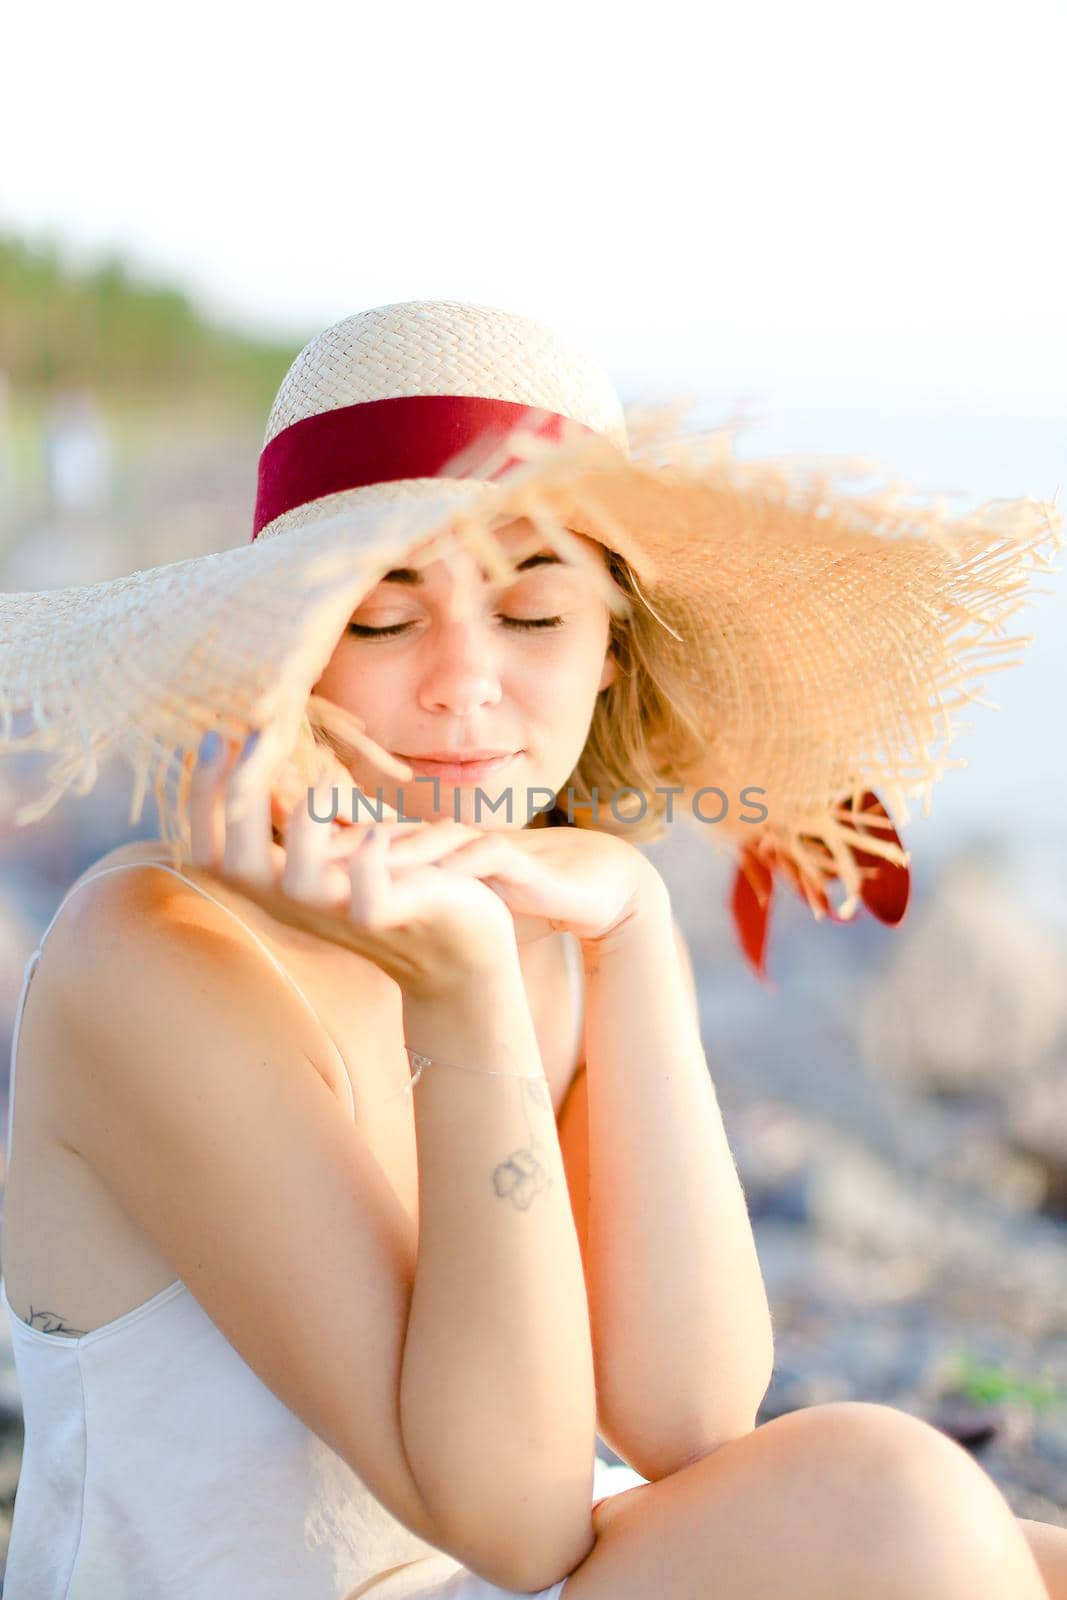 Portrait of beautiful woman wearing hat sitting on sand beach with closed eyes. Concept of fashion, beauty and summer vacations.